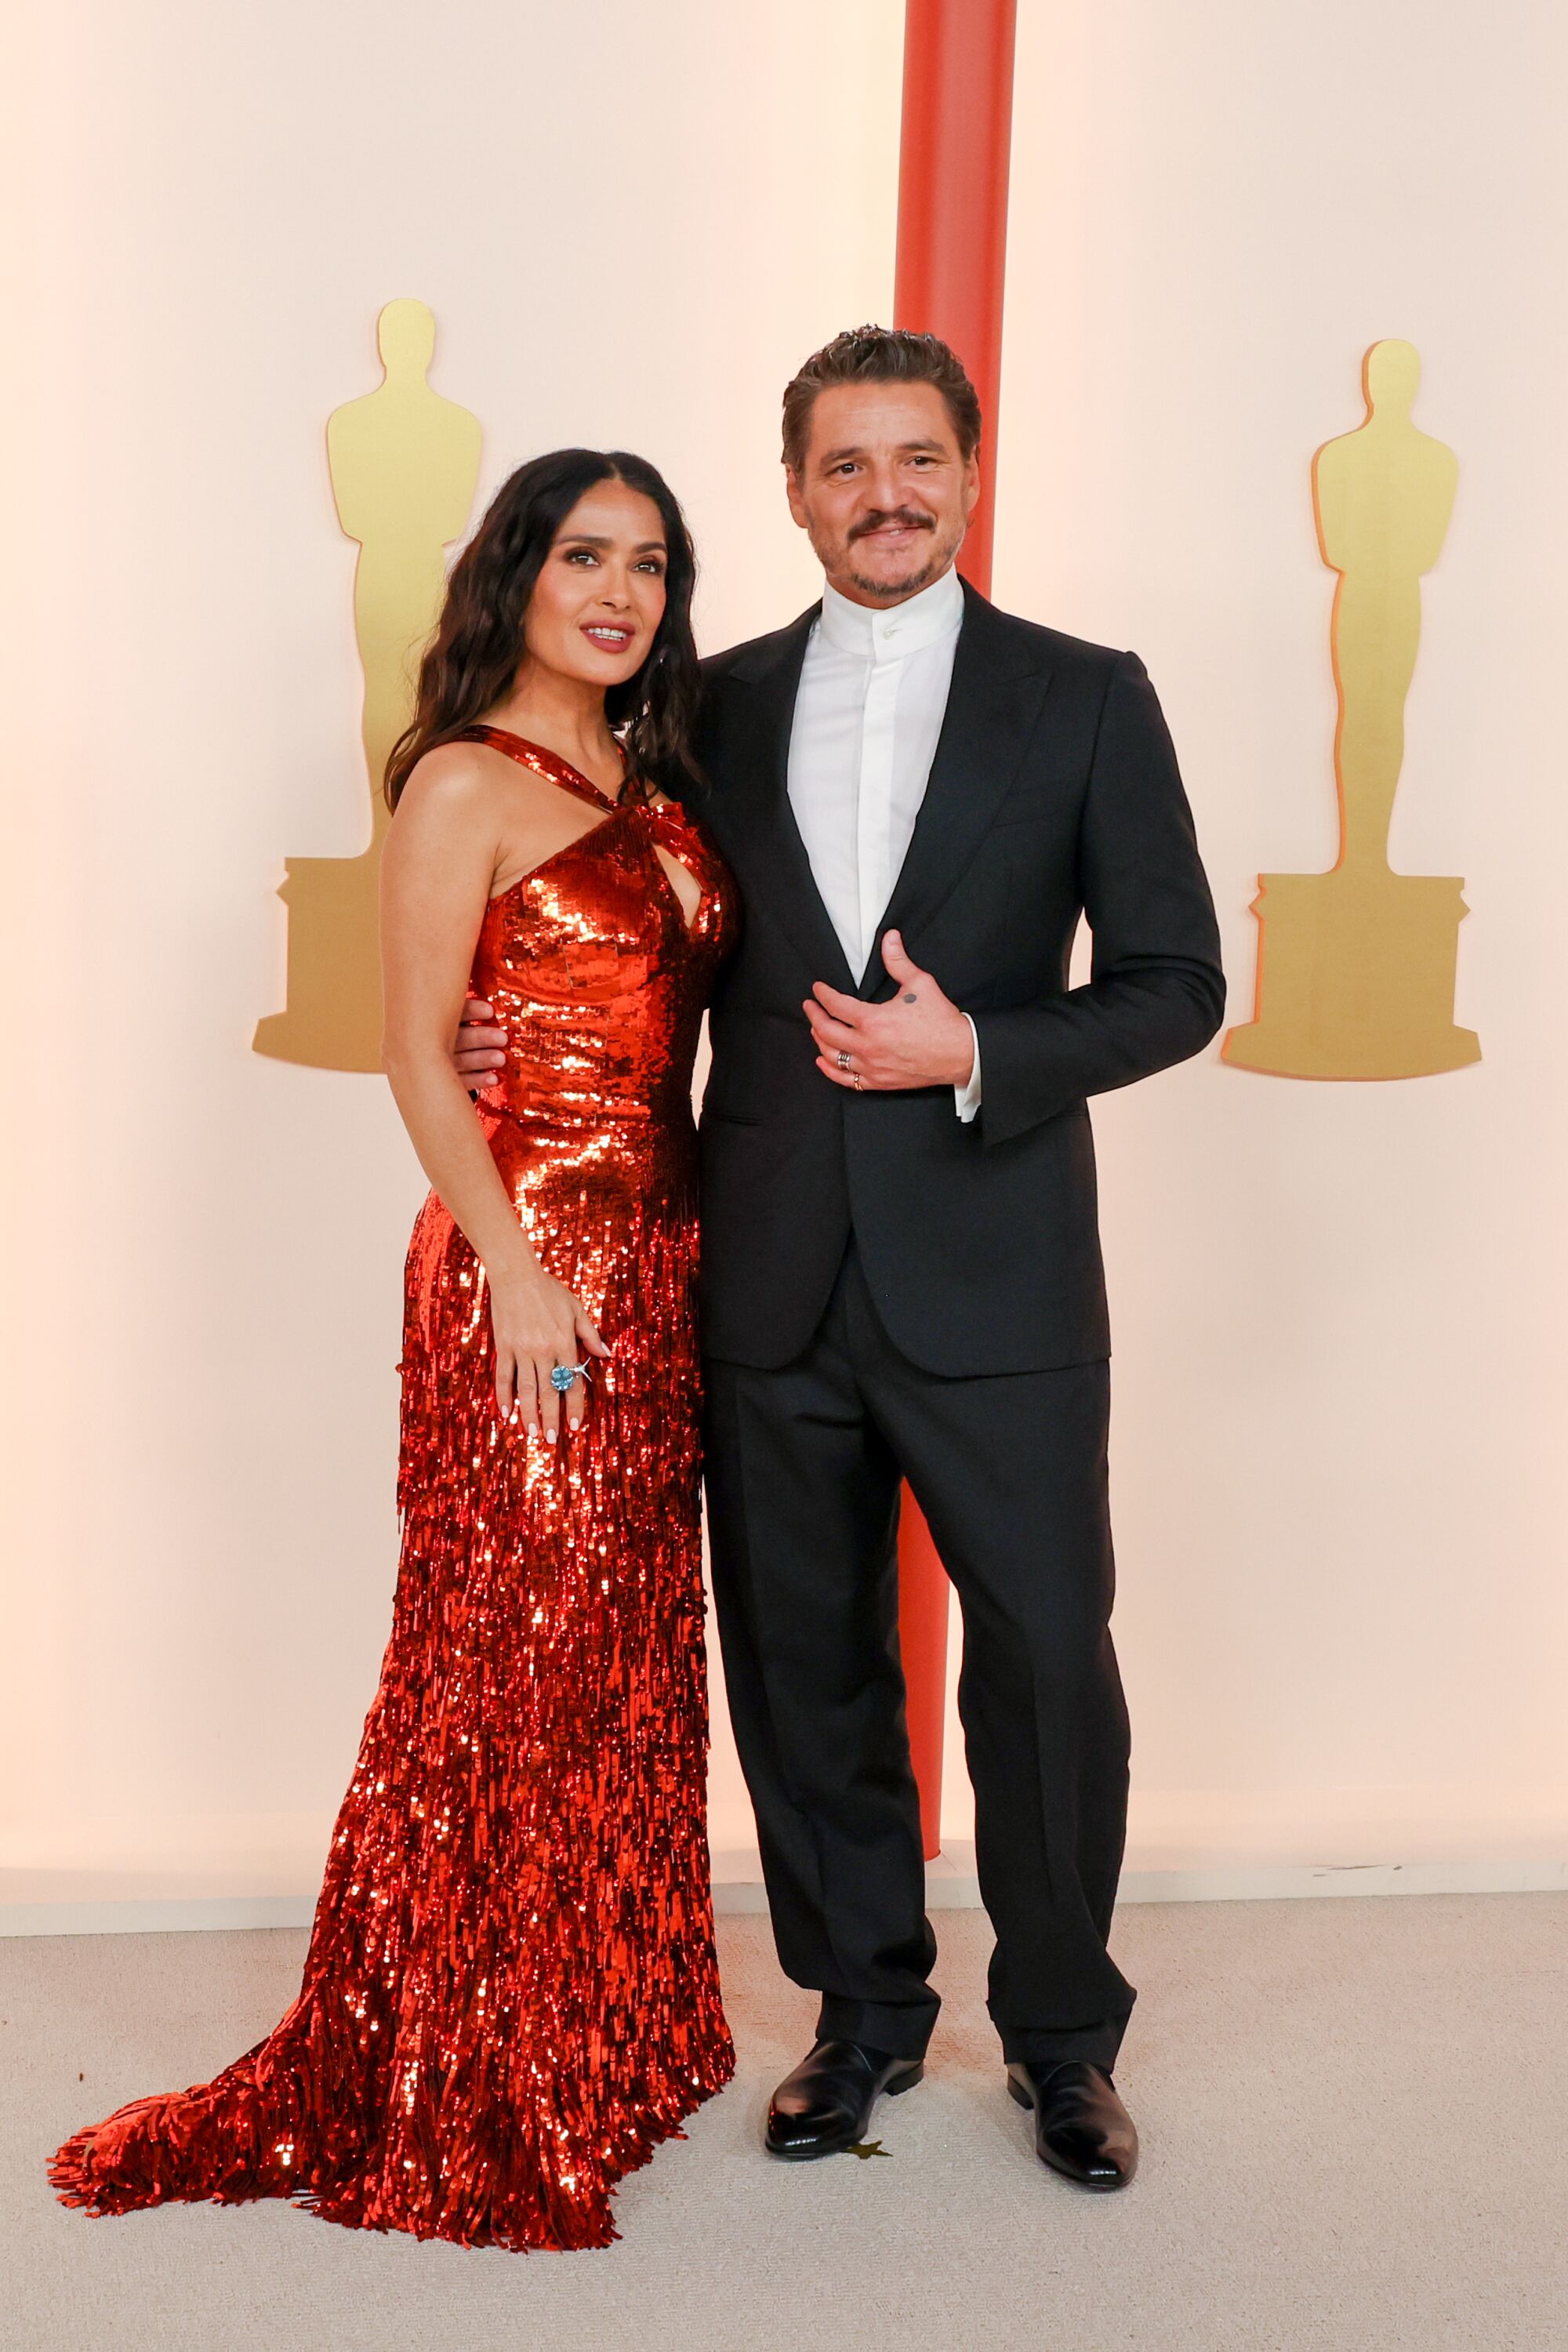 Salma Hayek and Pedro Pascal attend the 95th Academy Awards at the Dolby Theatre on March 12, 2023 in Hollywood, California.